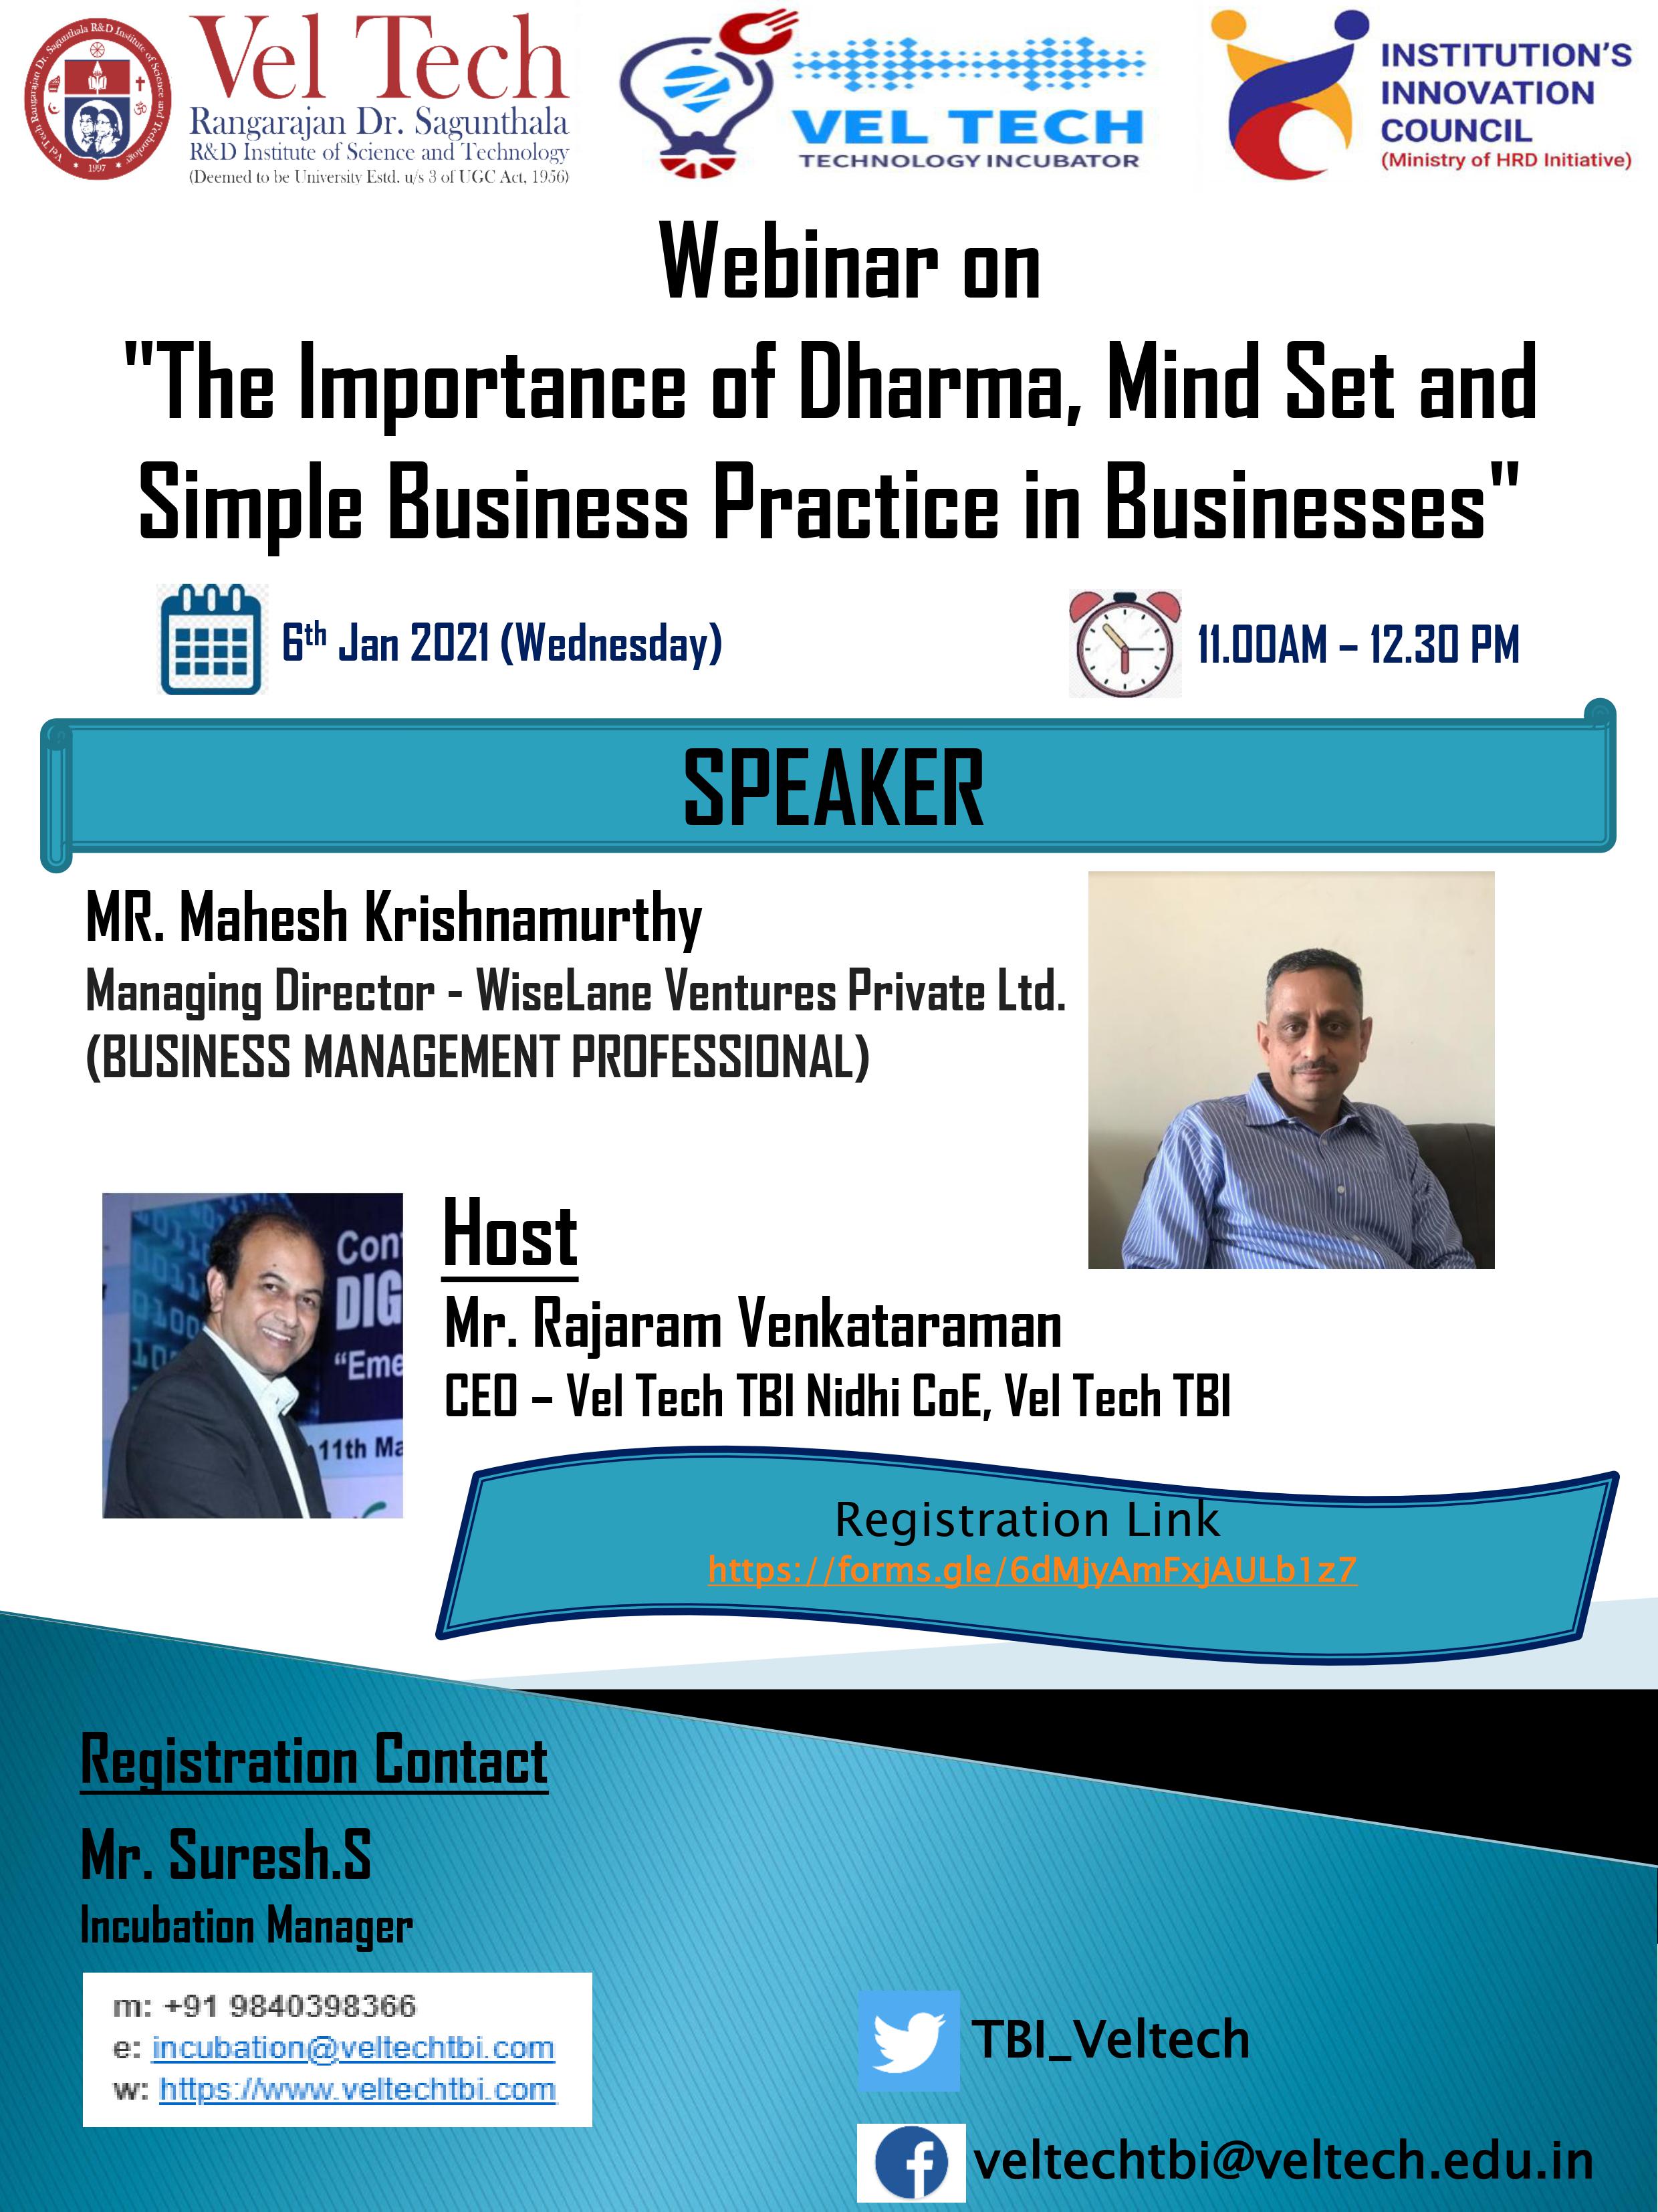 The Importance of Dharma, Mind Set and Simple Business Practice in Businesses 2021